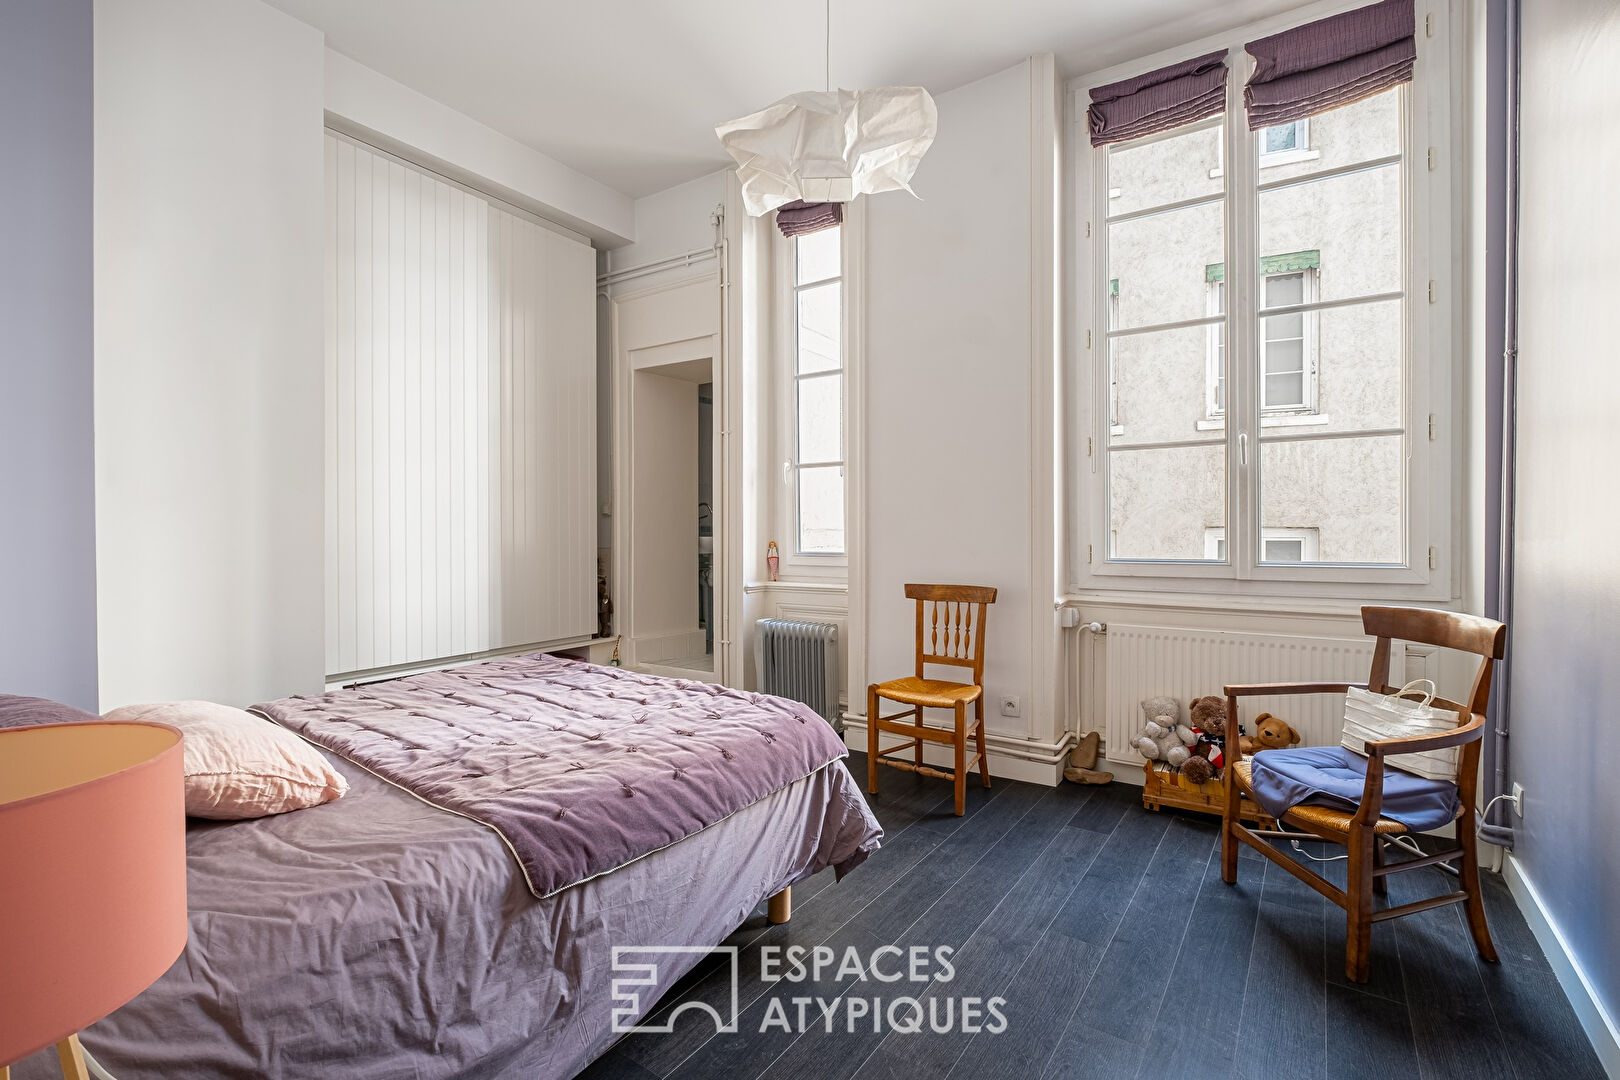 Bourgeois apartment in the heart of Ainay